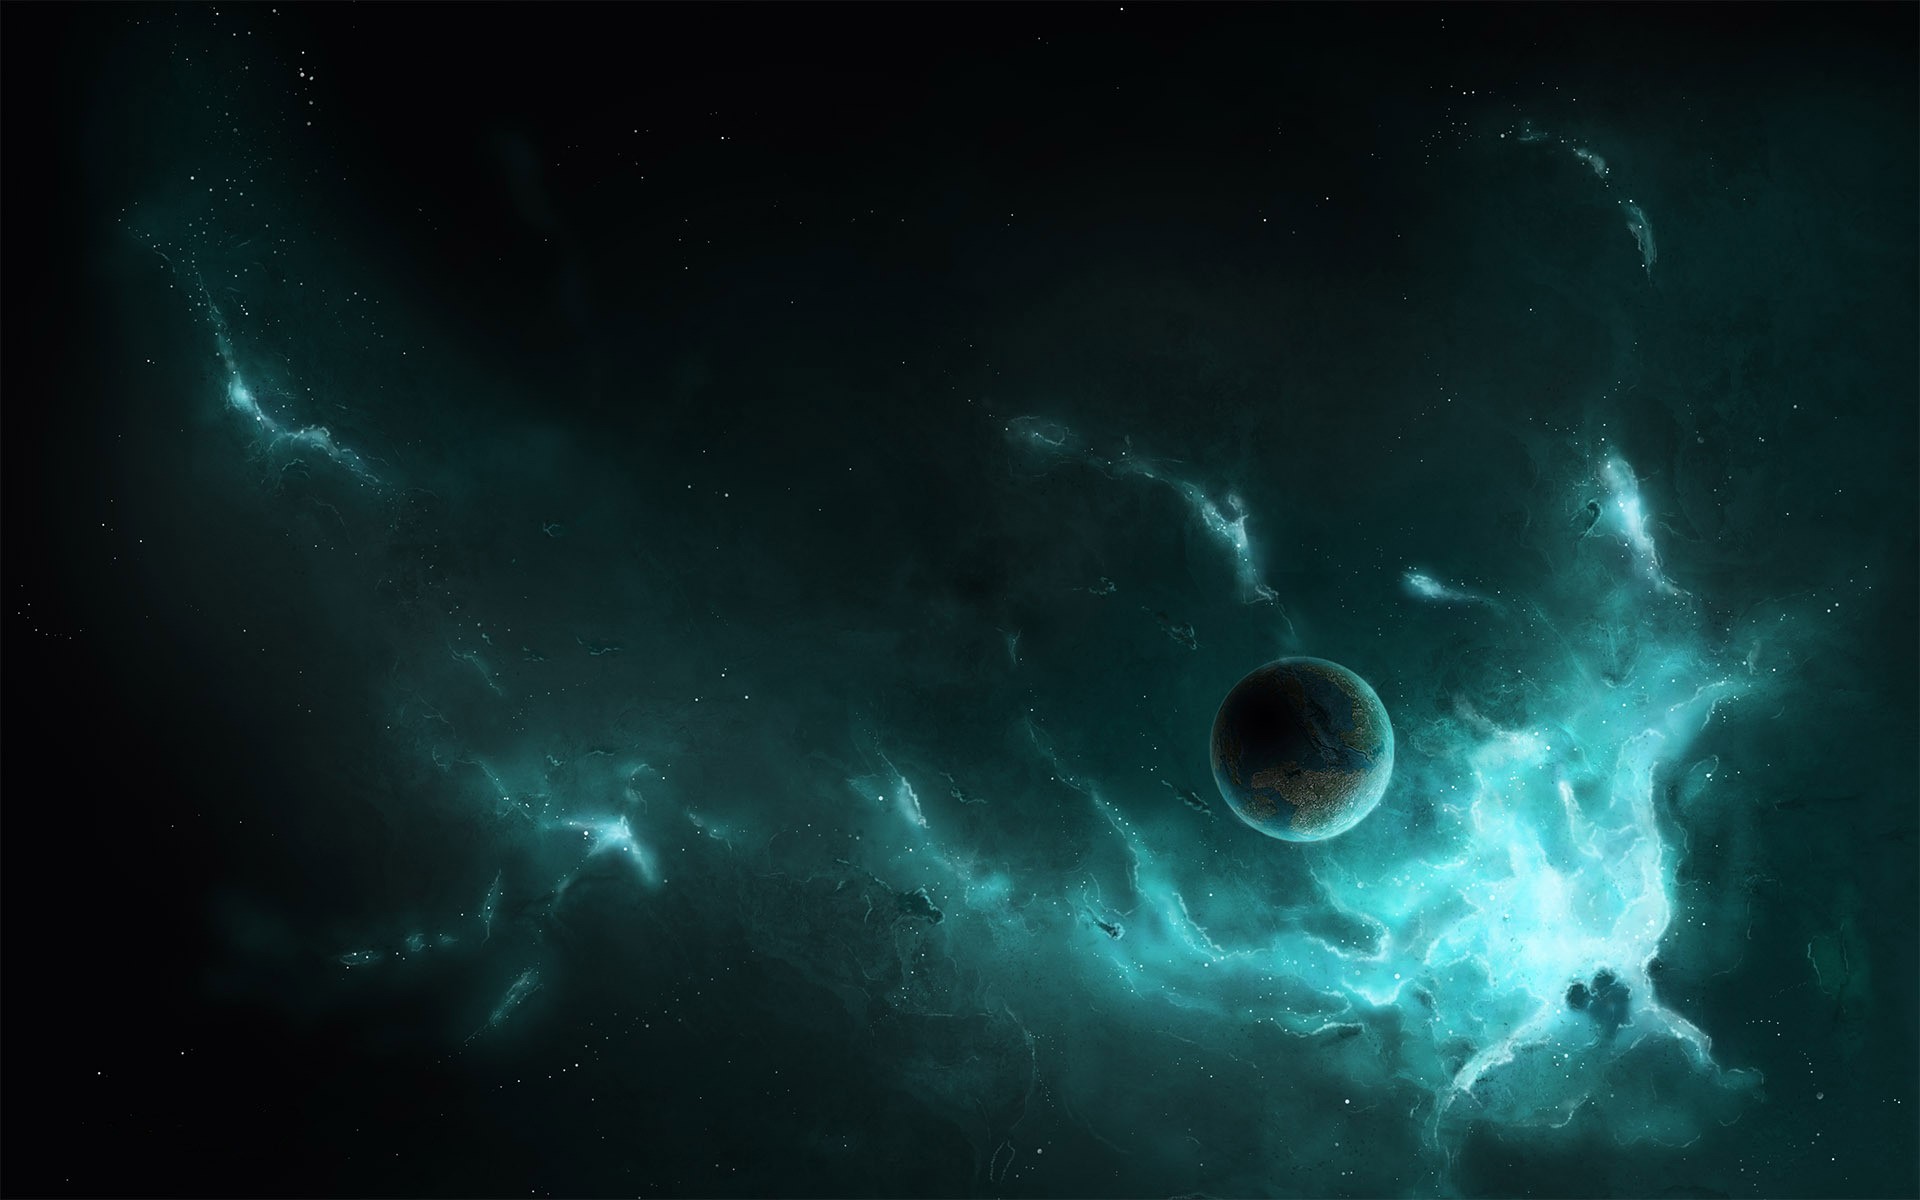 Turquoise Space Digital Art Wallpapers